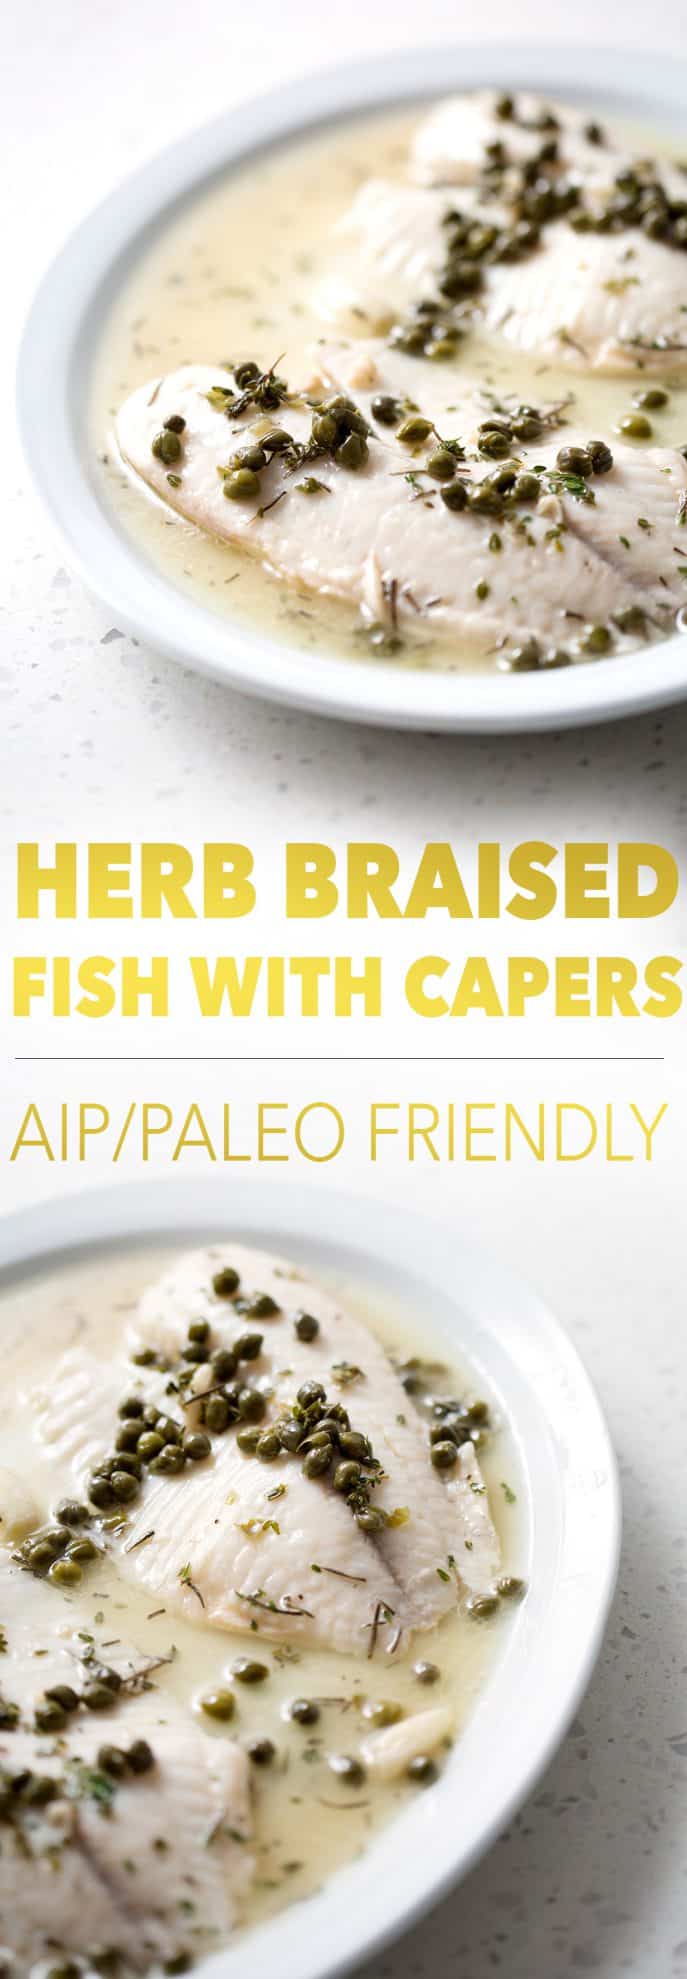 platters of aip/paleo friendly fish with capers and sauce